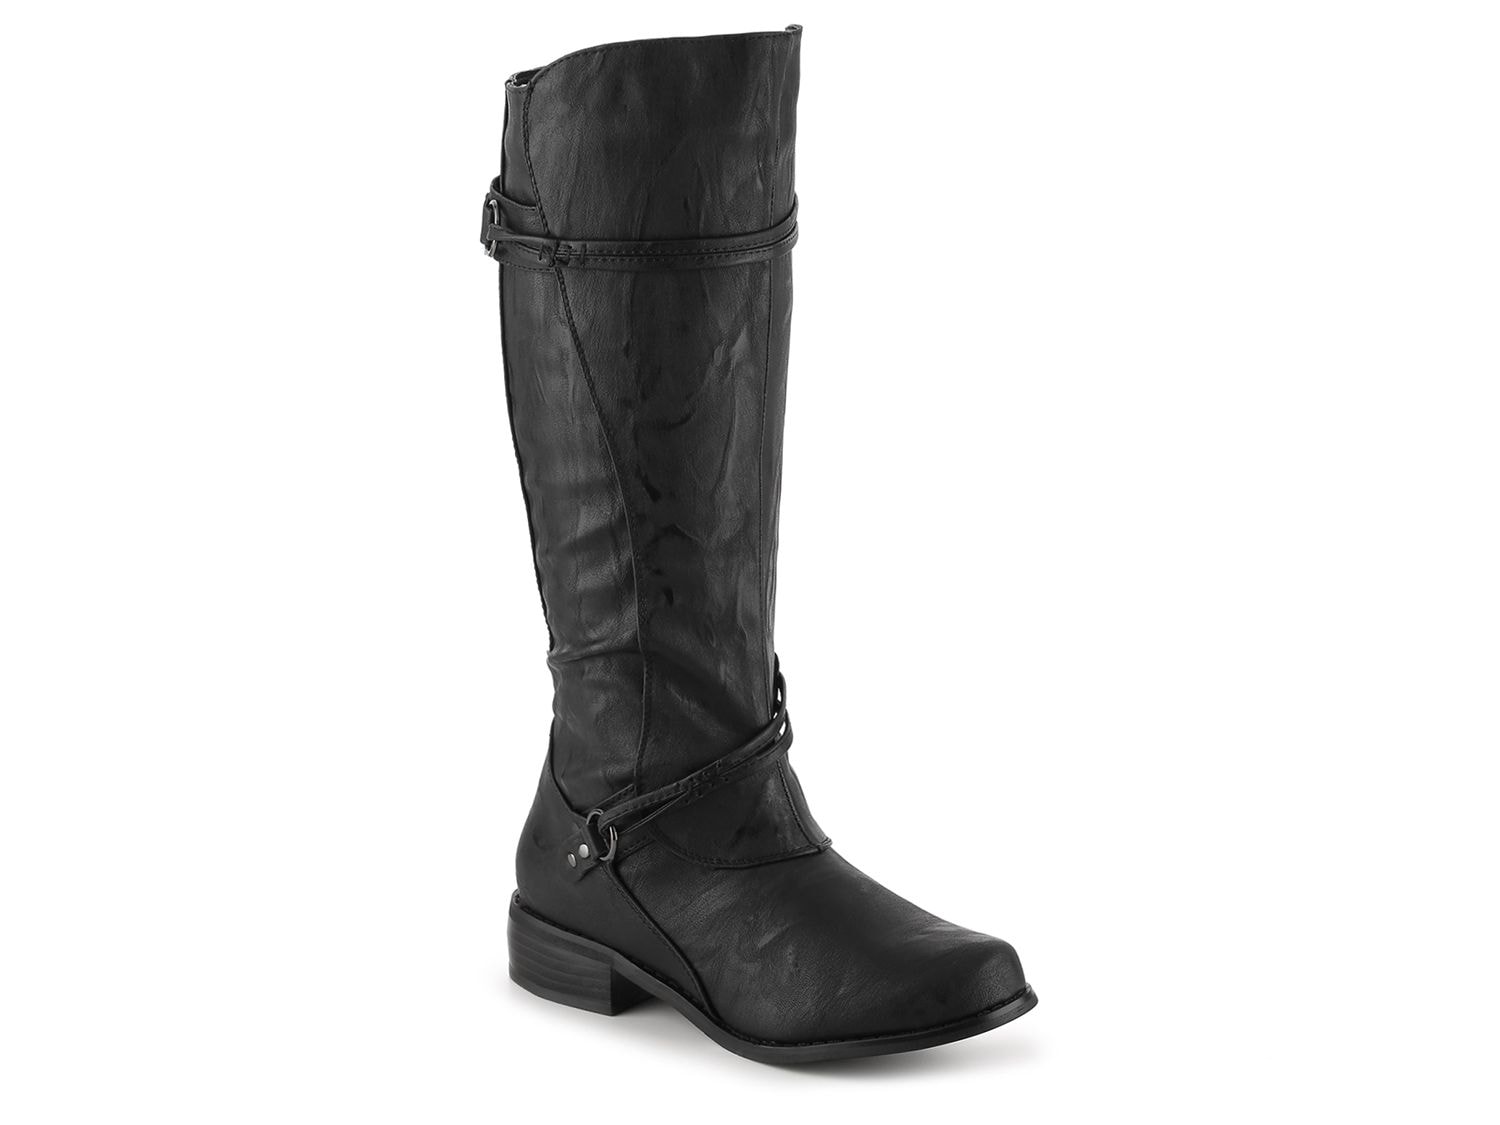 Journee Collection Harley Extra Wide Calf Riding Boot - Free Shipping | DSW